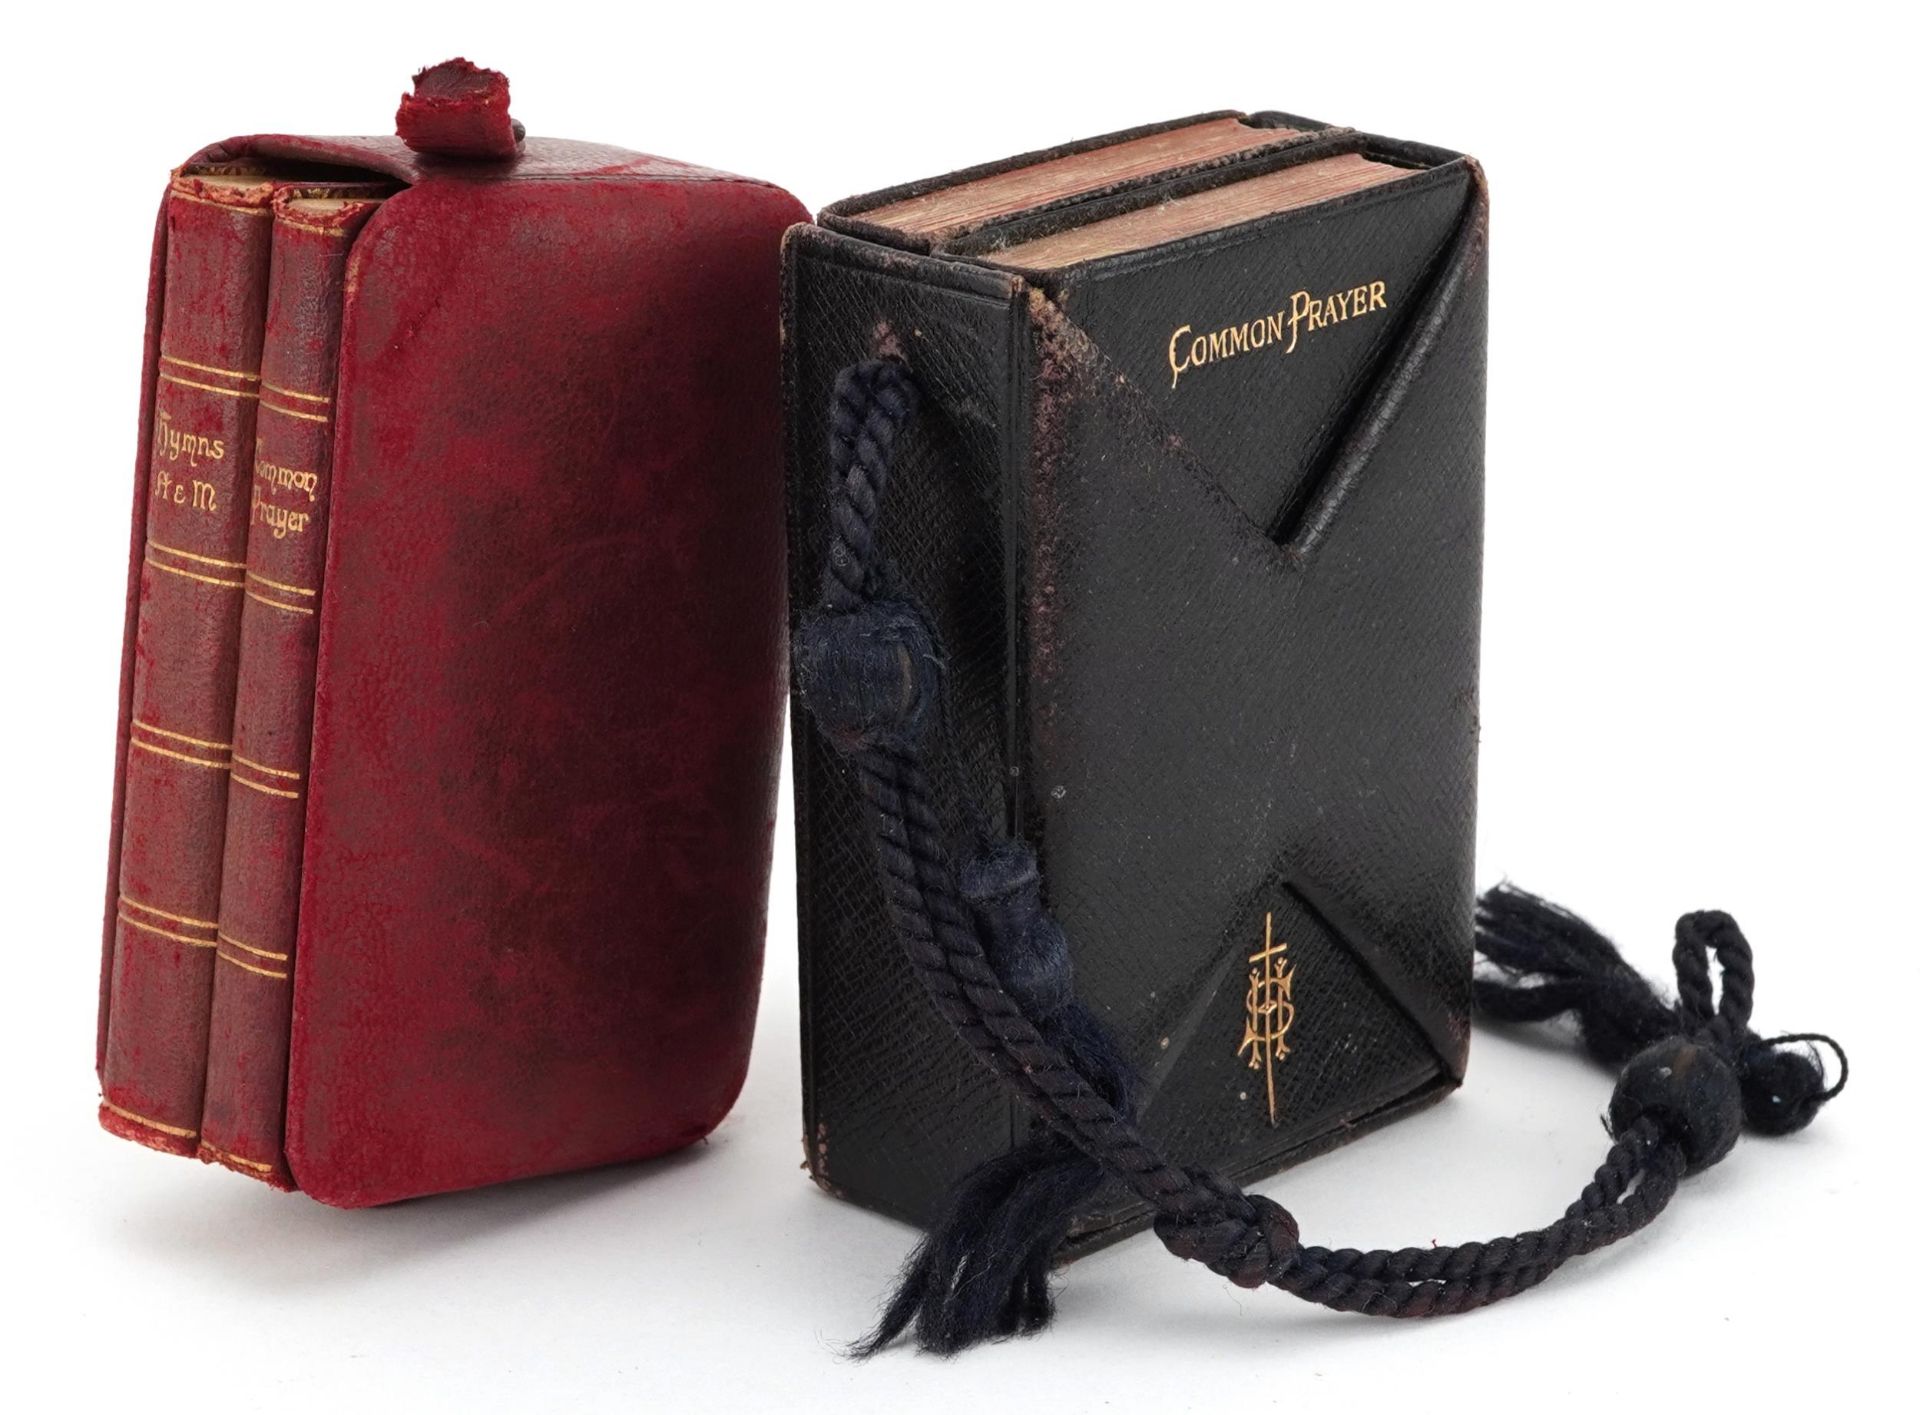 Leather bound Hymns Ancient & Modern, London printed William Clowes & Sons, Common Prayer & Hymns